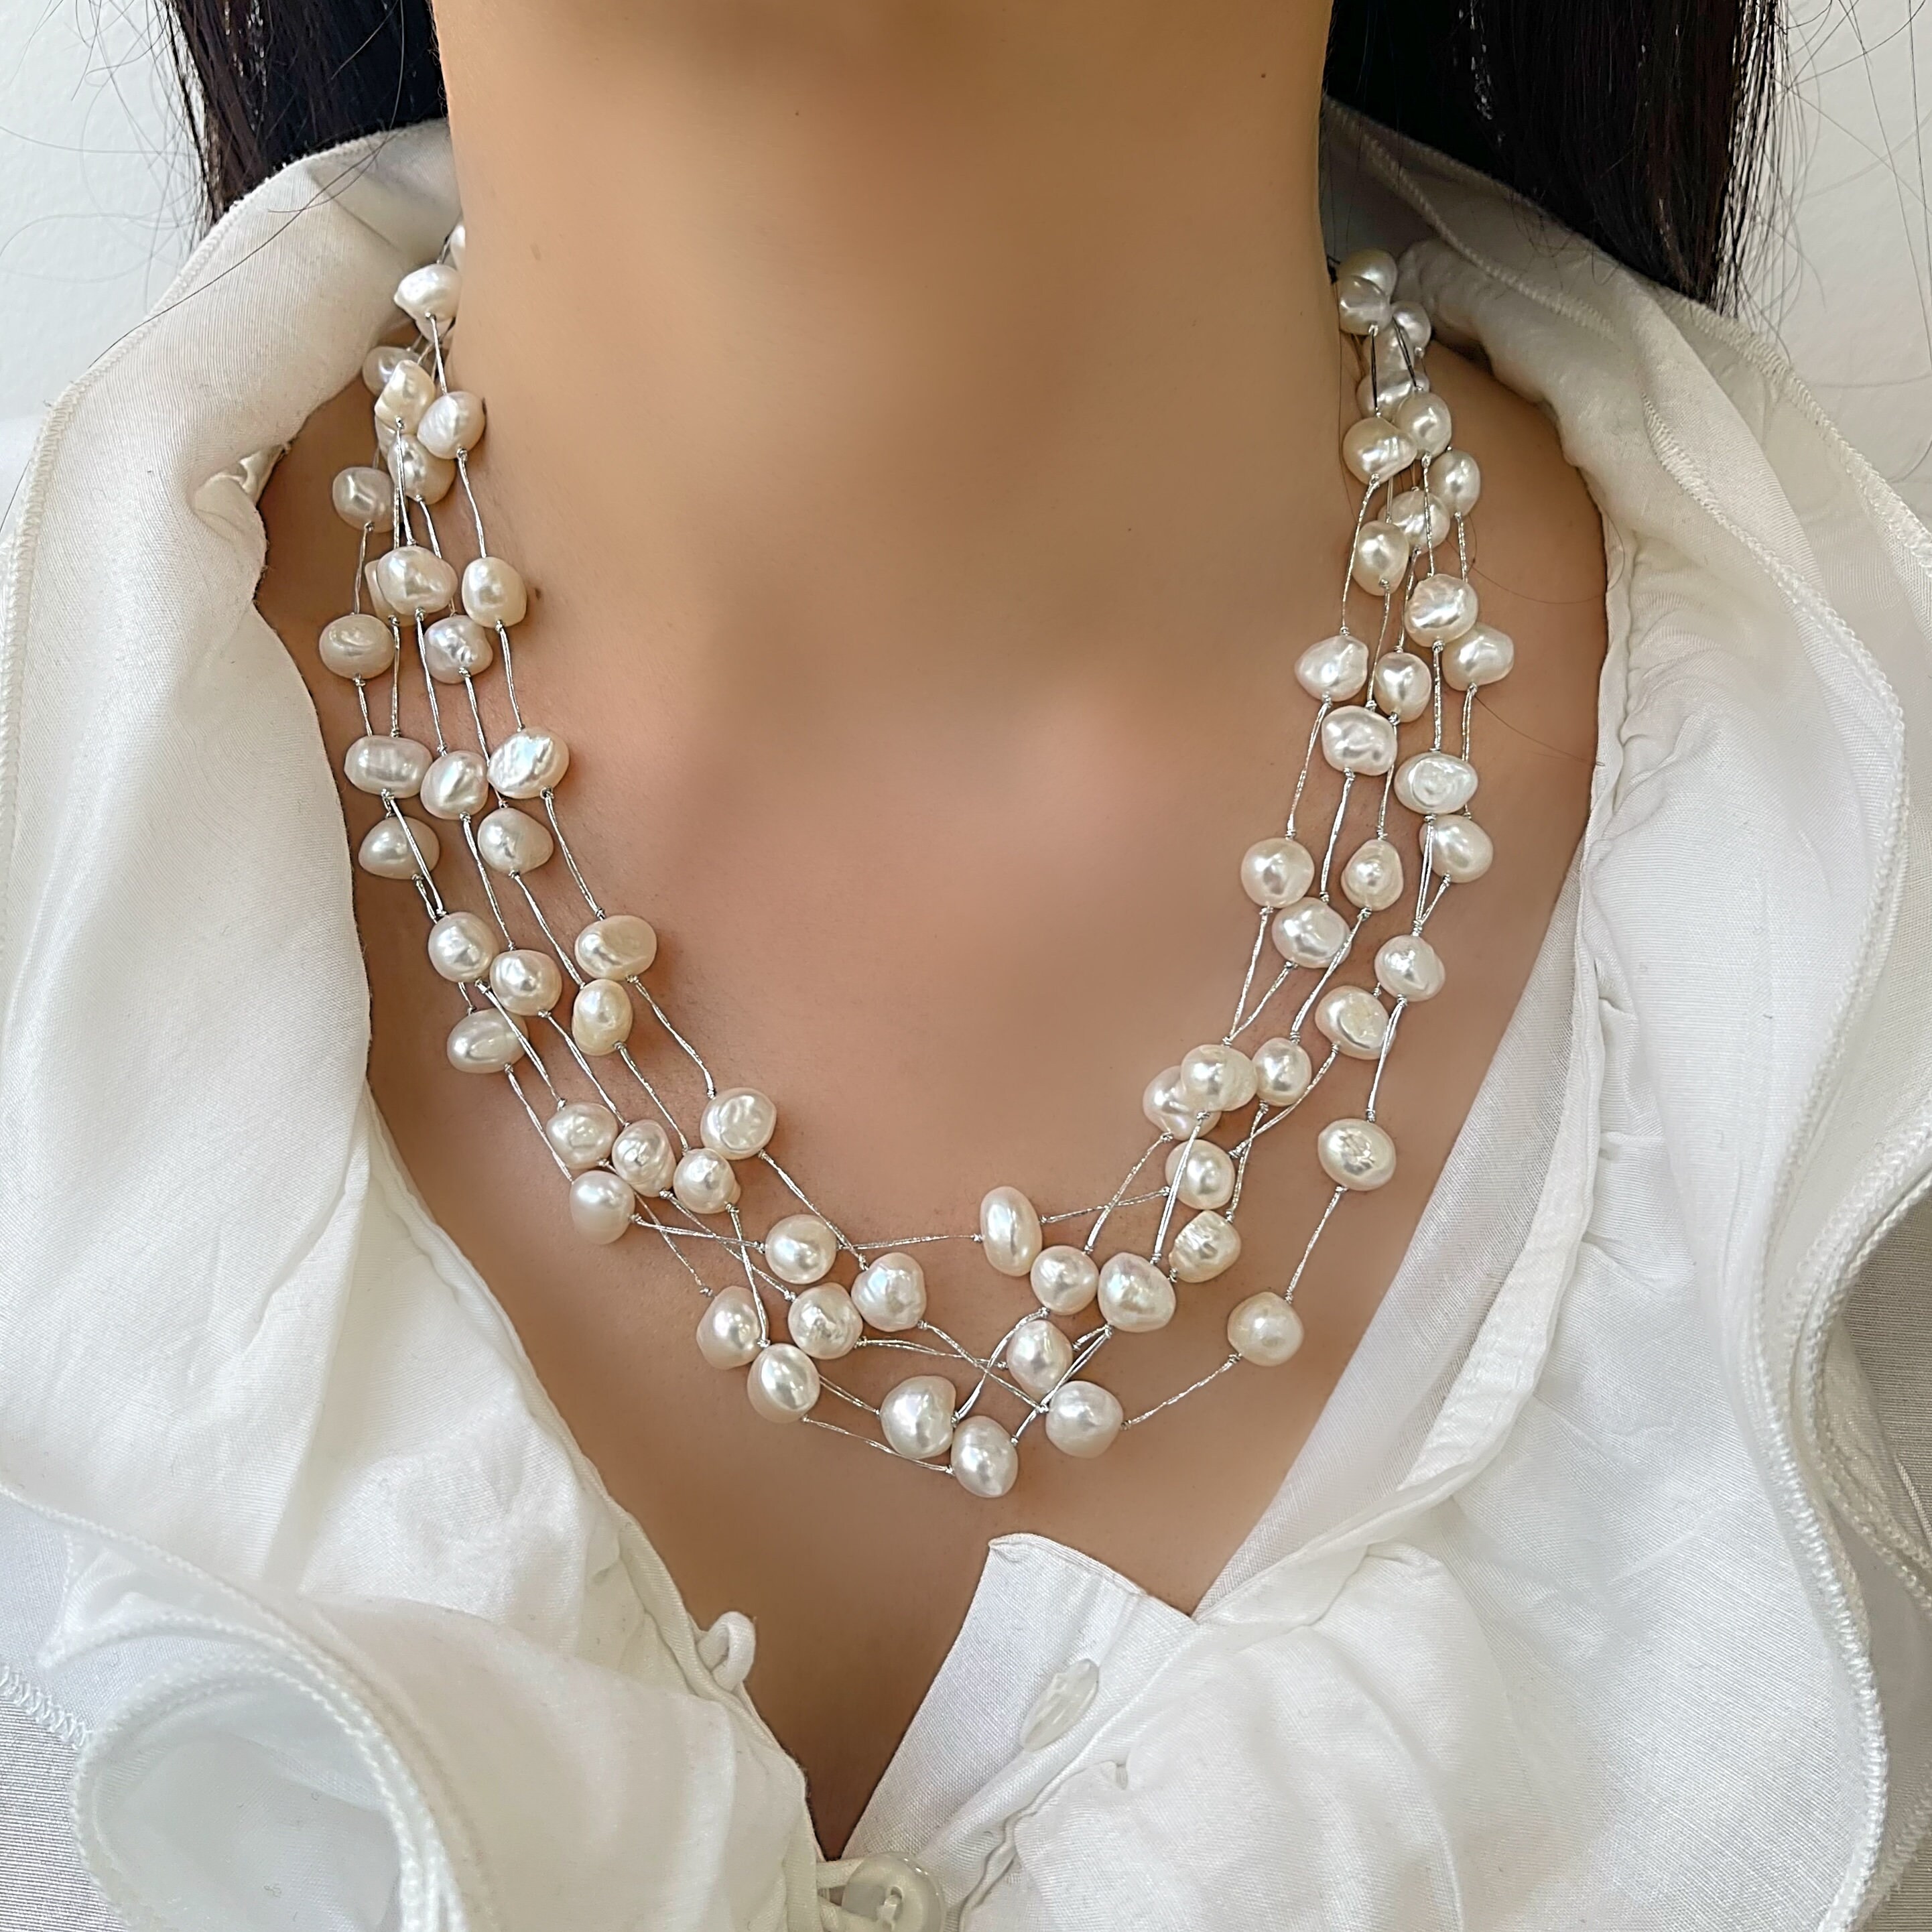 Buy Floating Pearls Products Online at Best Prices in South Africa